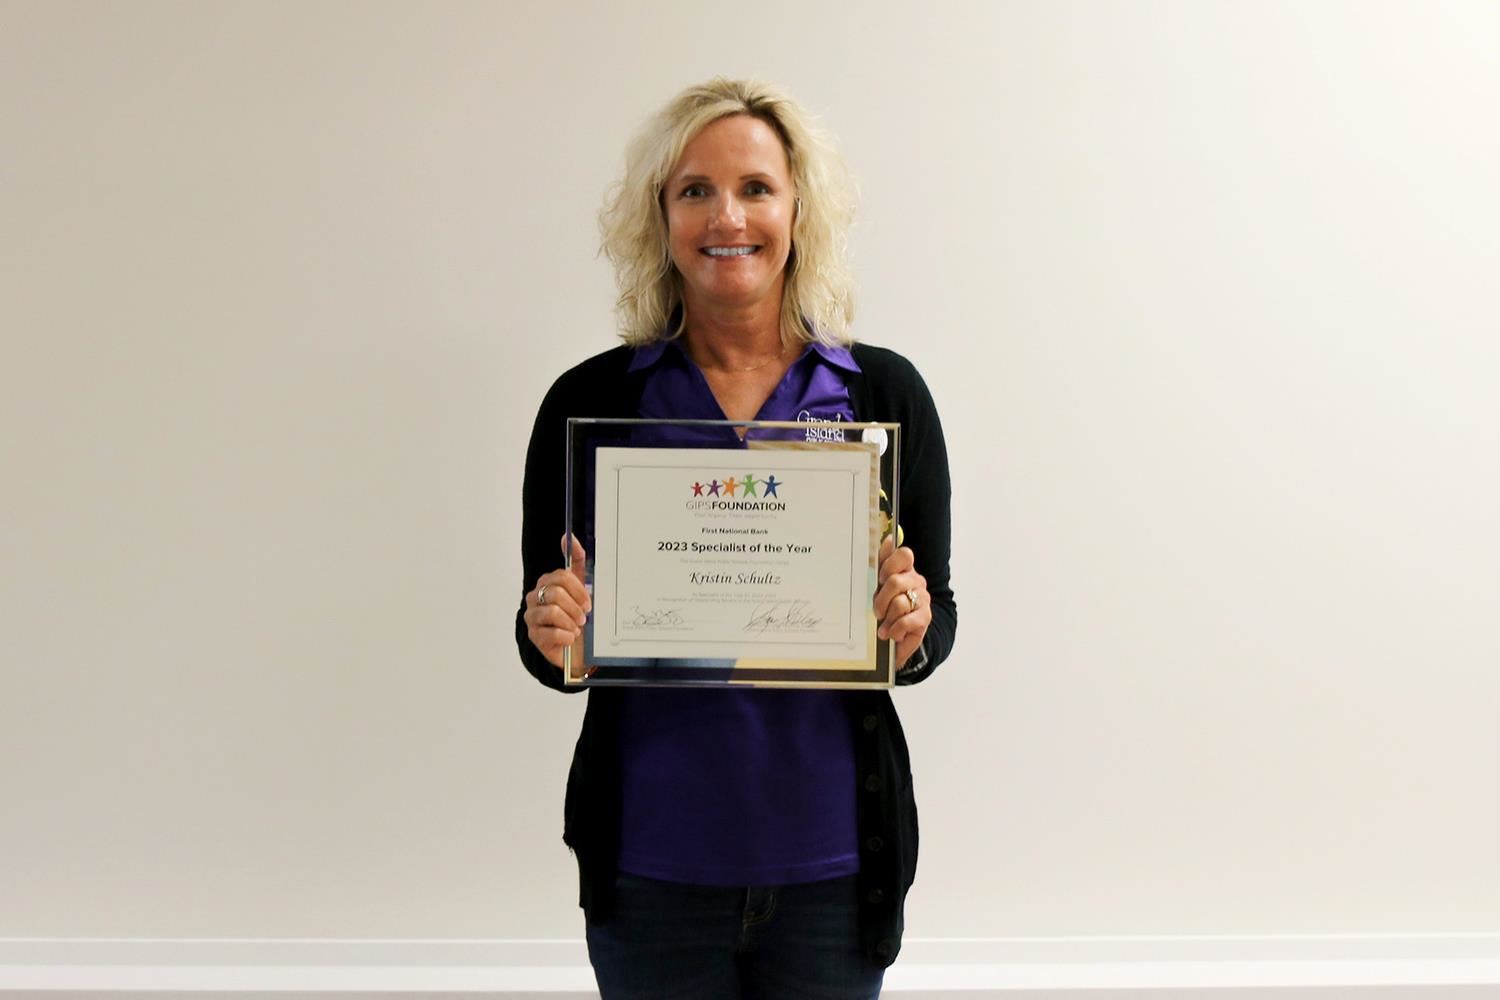 Kristin Schultz smiling with her Specialist of the Year plaque